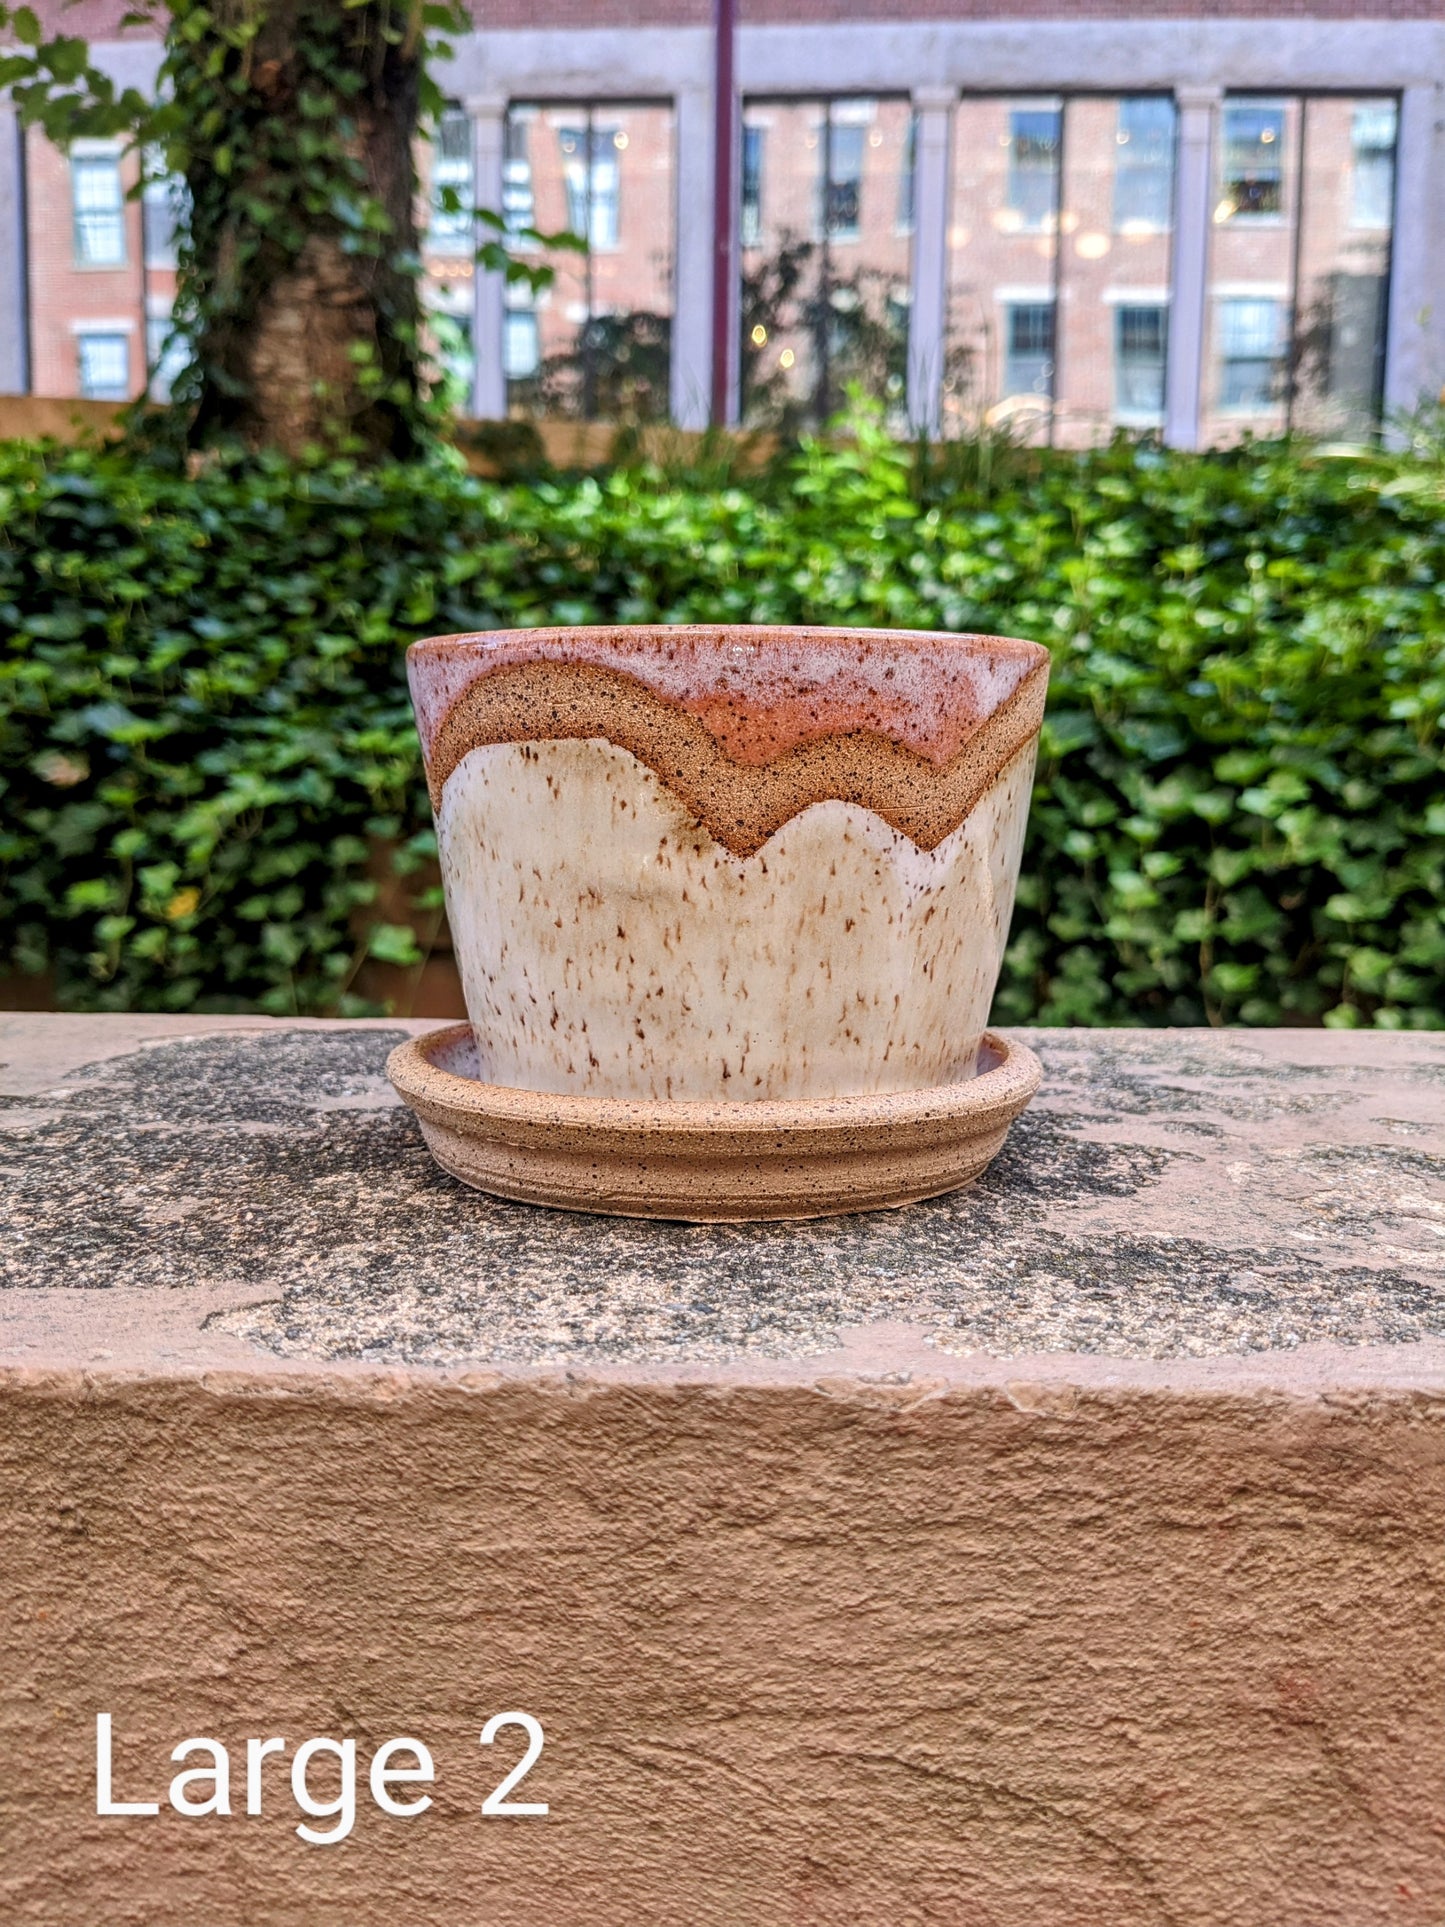 Handcrafted Ceramic Planters